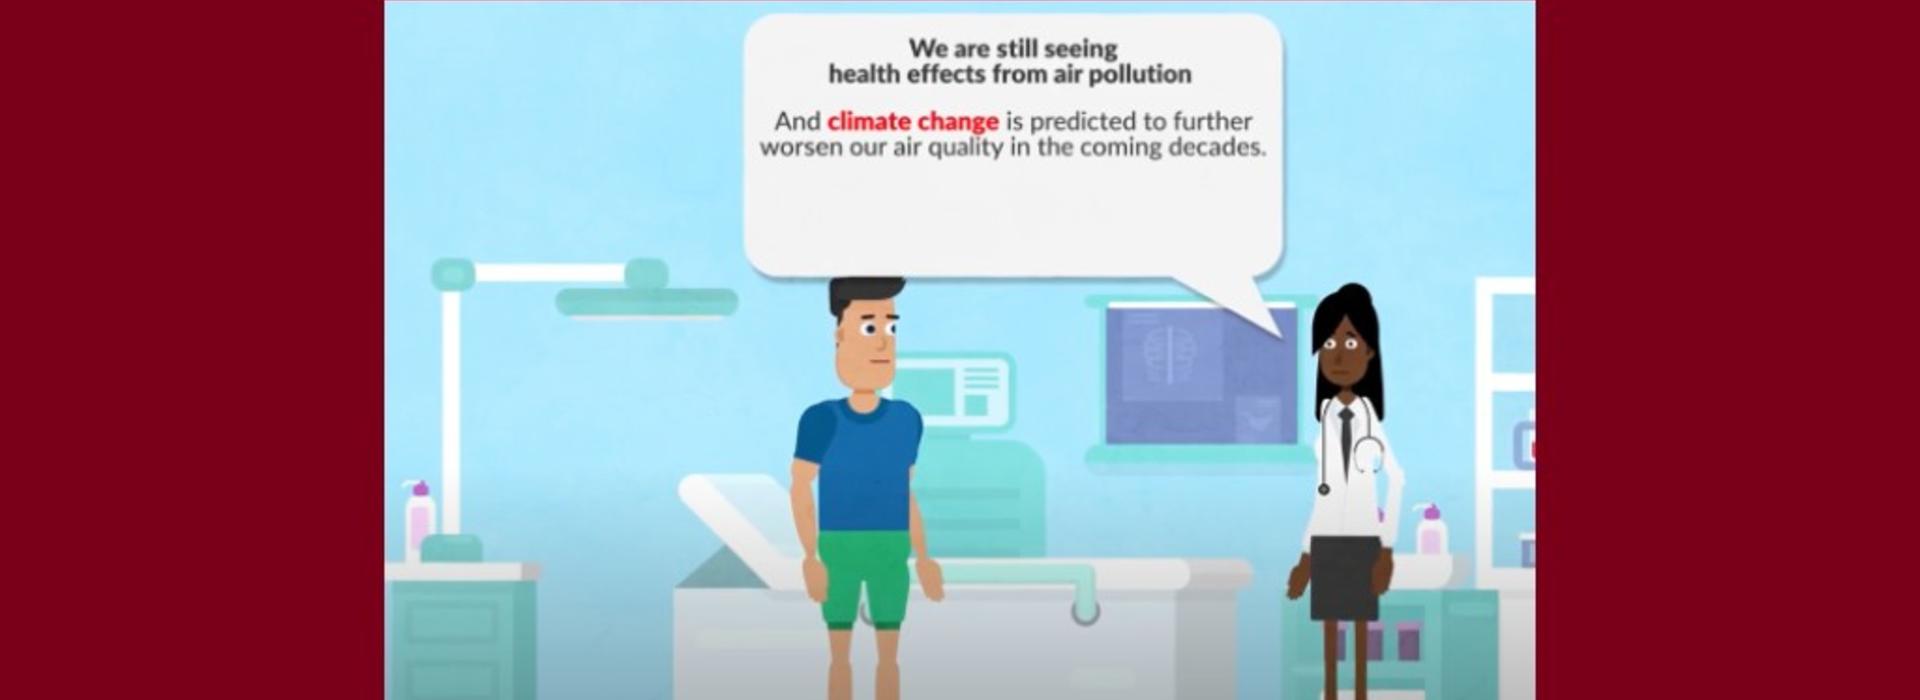 Cartoon of patient and doctor talking about the impact of air pollution on health